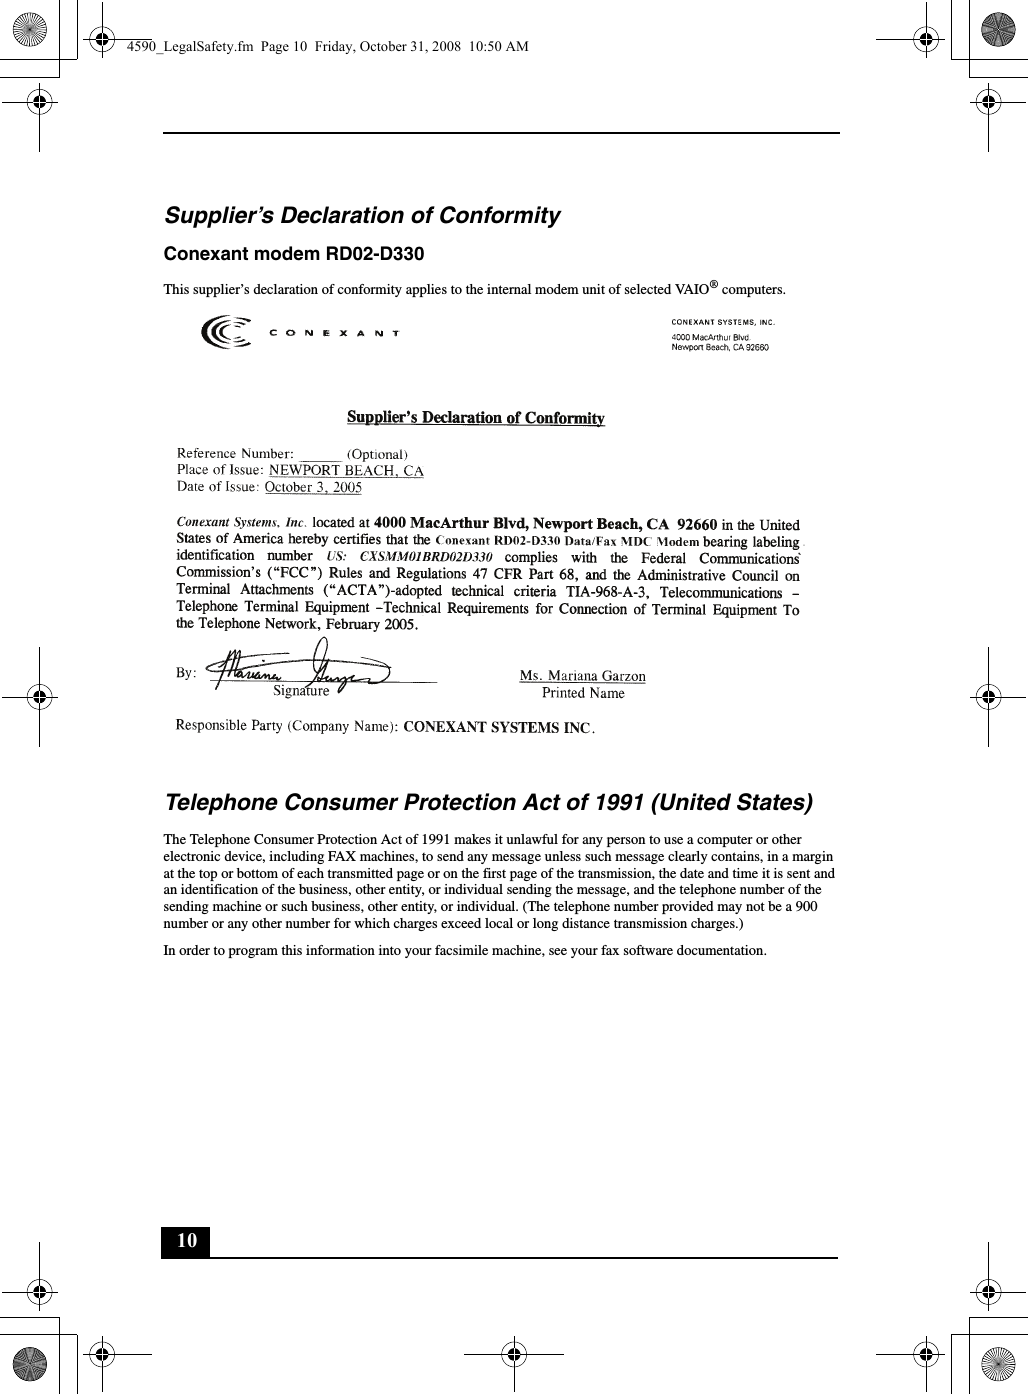 10Supplier’s Declaration of ConformityConexant modem RD02-D330This supplier’s declaration of conformity applies to the internal modem unit of selected VAIO® computers.Telephone Consumer Protection Act of 1991 (United States) The Telephone Consumer Protection Act of 1991 makes it unlawful for any person to use a computer or other electronic device, including FAX machines, to send any message unless such message clearly contains, in a margin at the top or bottom of each transmitted page or on the first page of the transmission, the date and time it is sent and an identification of the business, other entity, or individual sending the message, and the telephone number of the sending machine or such business, other entity, or individual. (The telephone number provided may not be a 900 number or any other number for which charges exceed local or long distance transmission charges.)In order to program this information into your facsimile machine, see your fax software documentation.4590_LegalSafety.fm  Page 10  Friday, October 31, 2008  10:50 AM